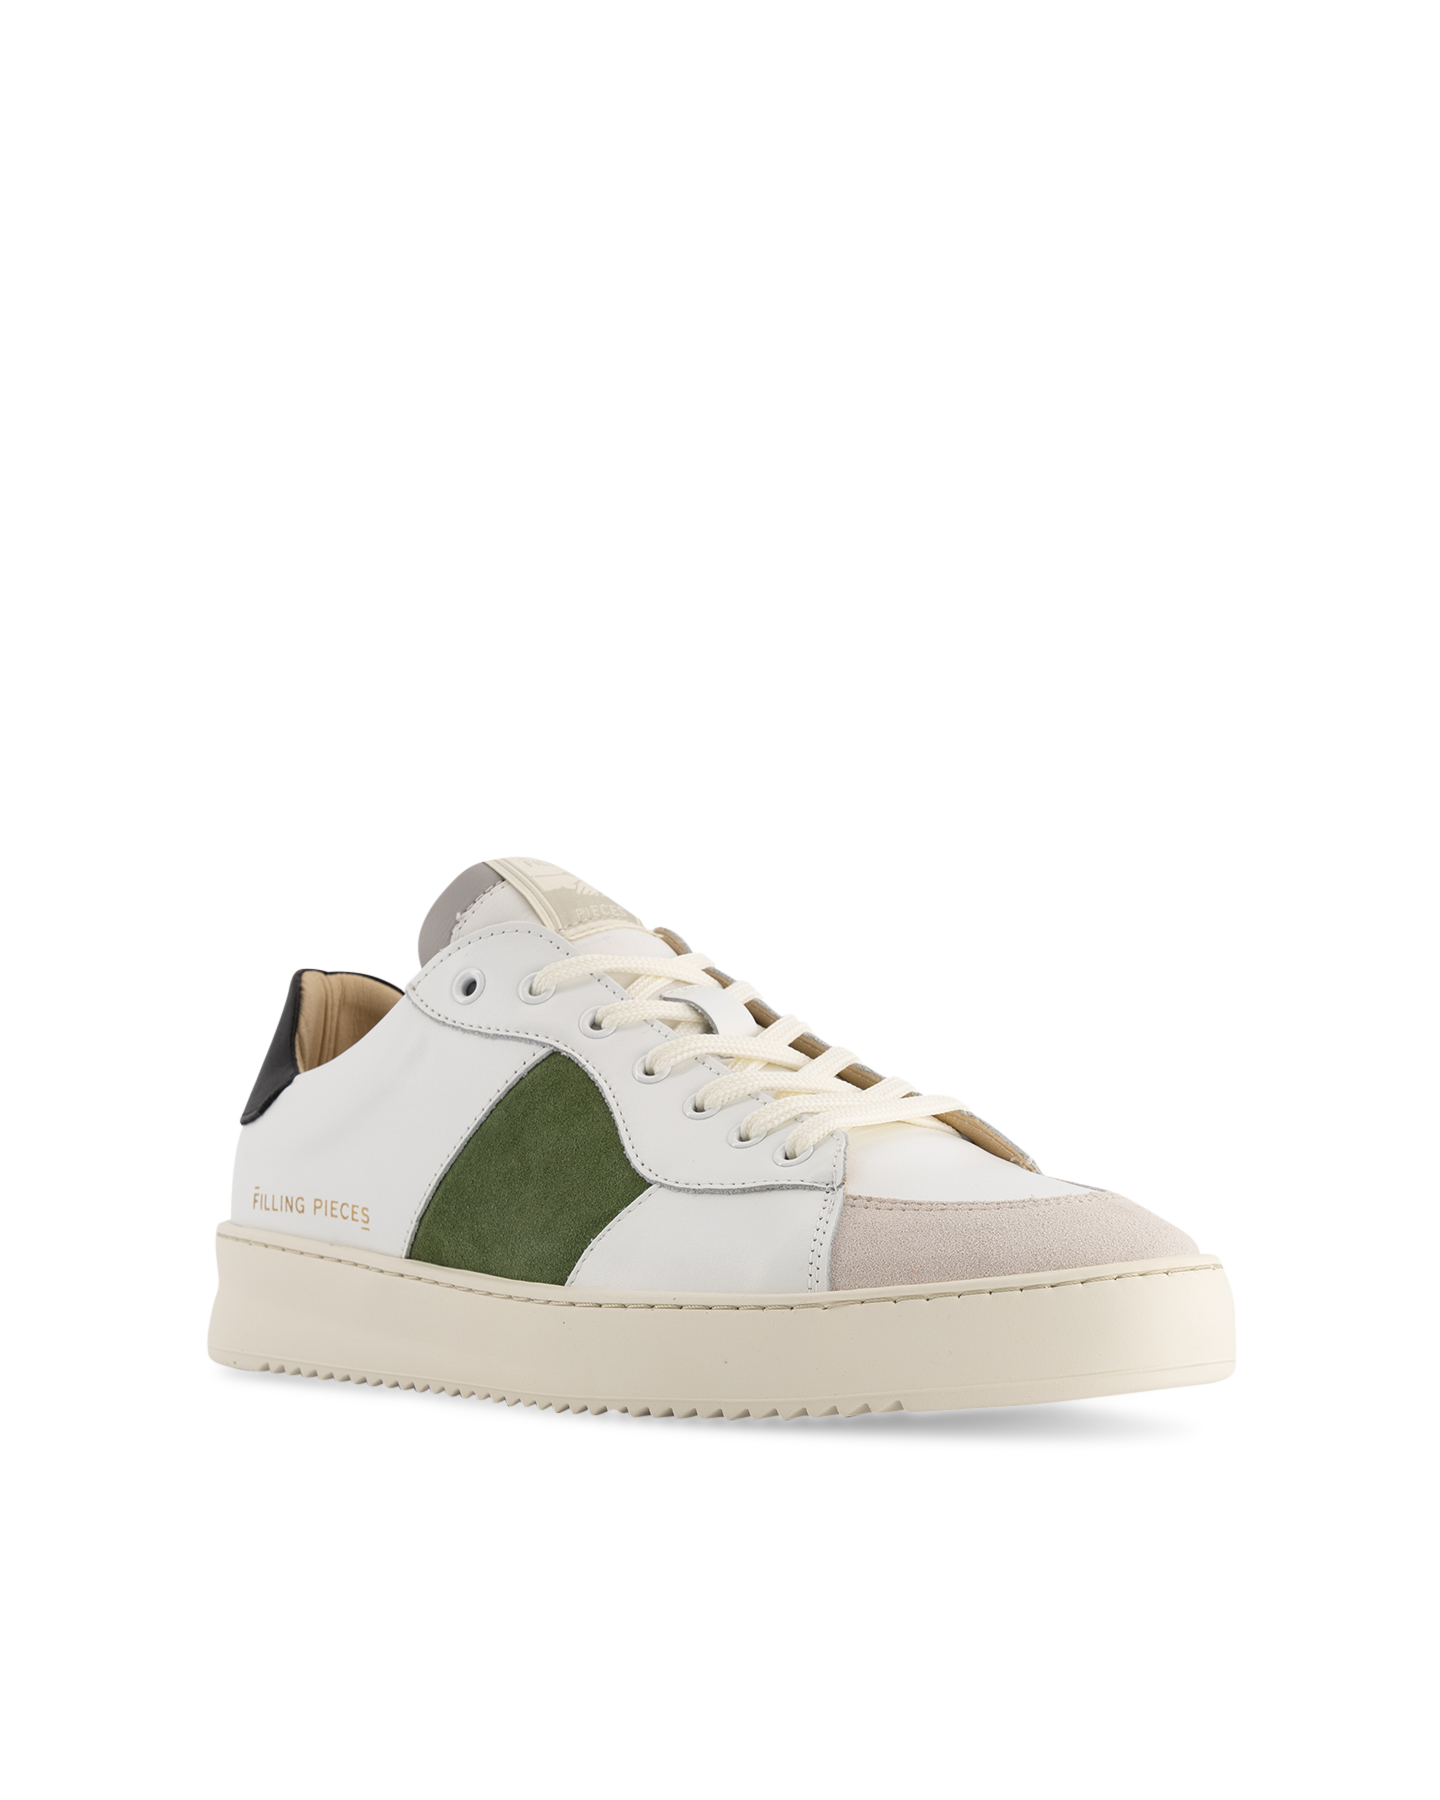 Filling Pieces Court Strata Agave GROEN 2